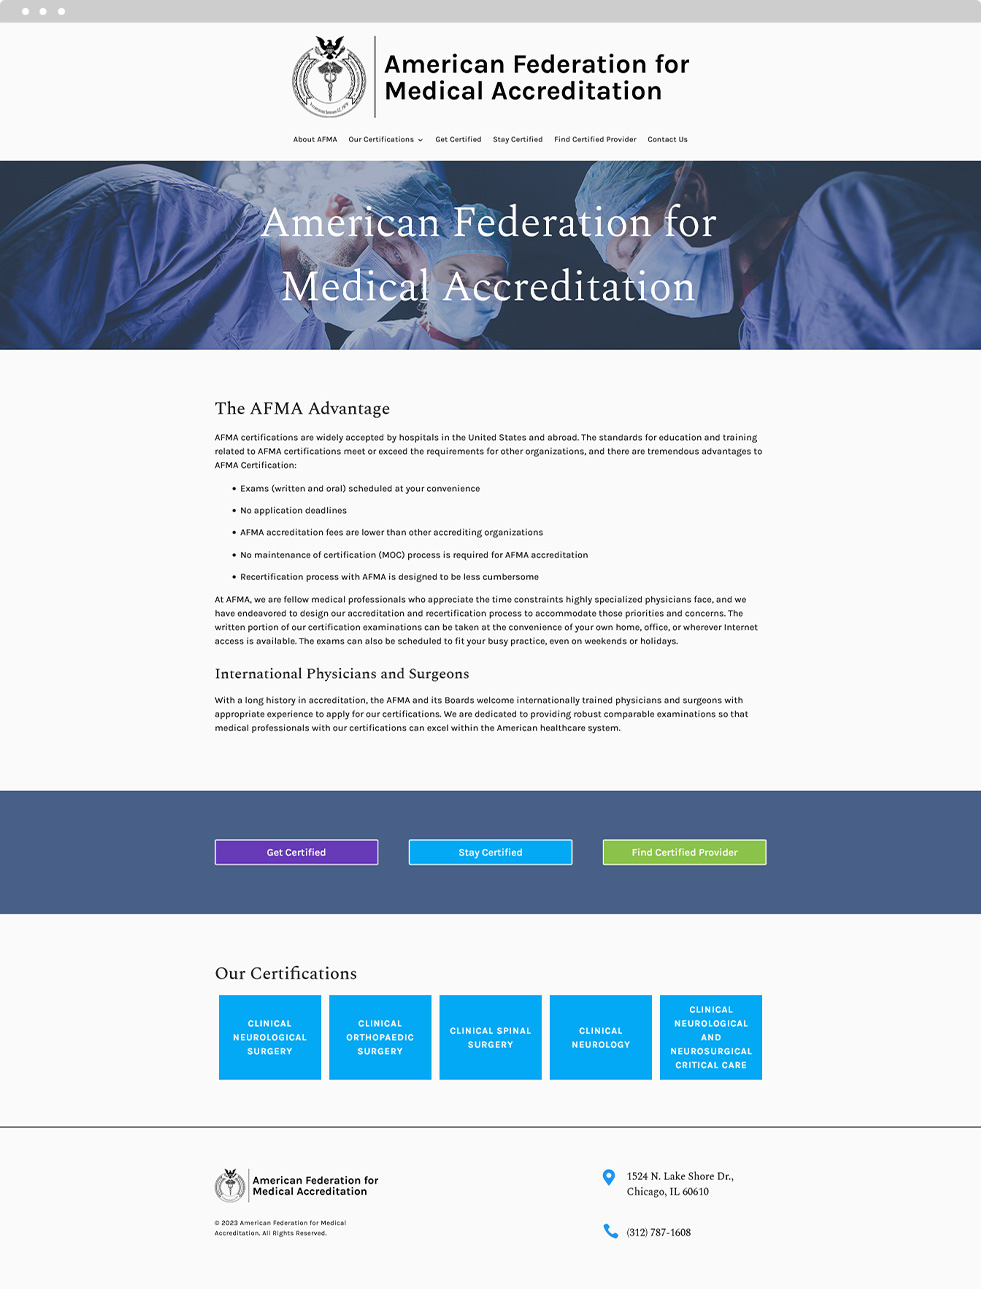 Medical Associations Website Design - American Federation for Medical Accreditation - Homepage